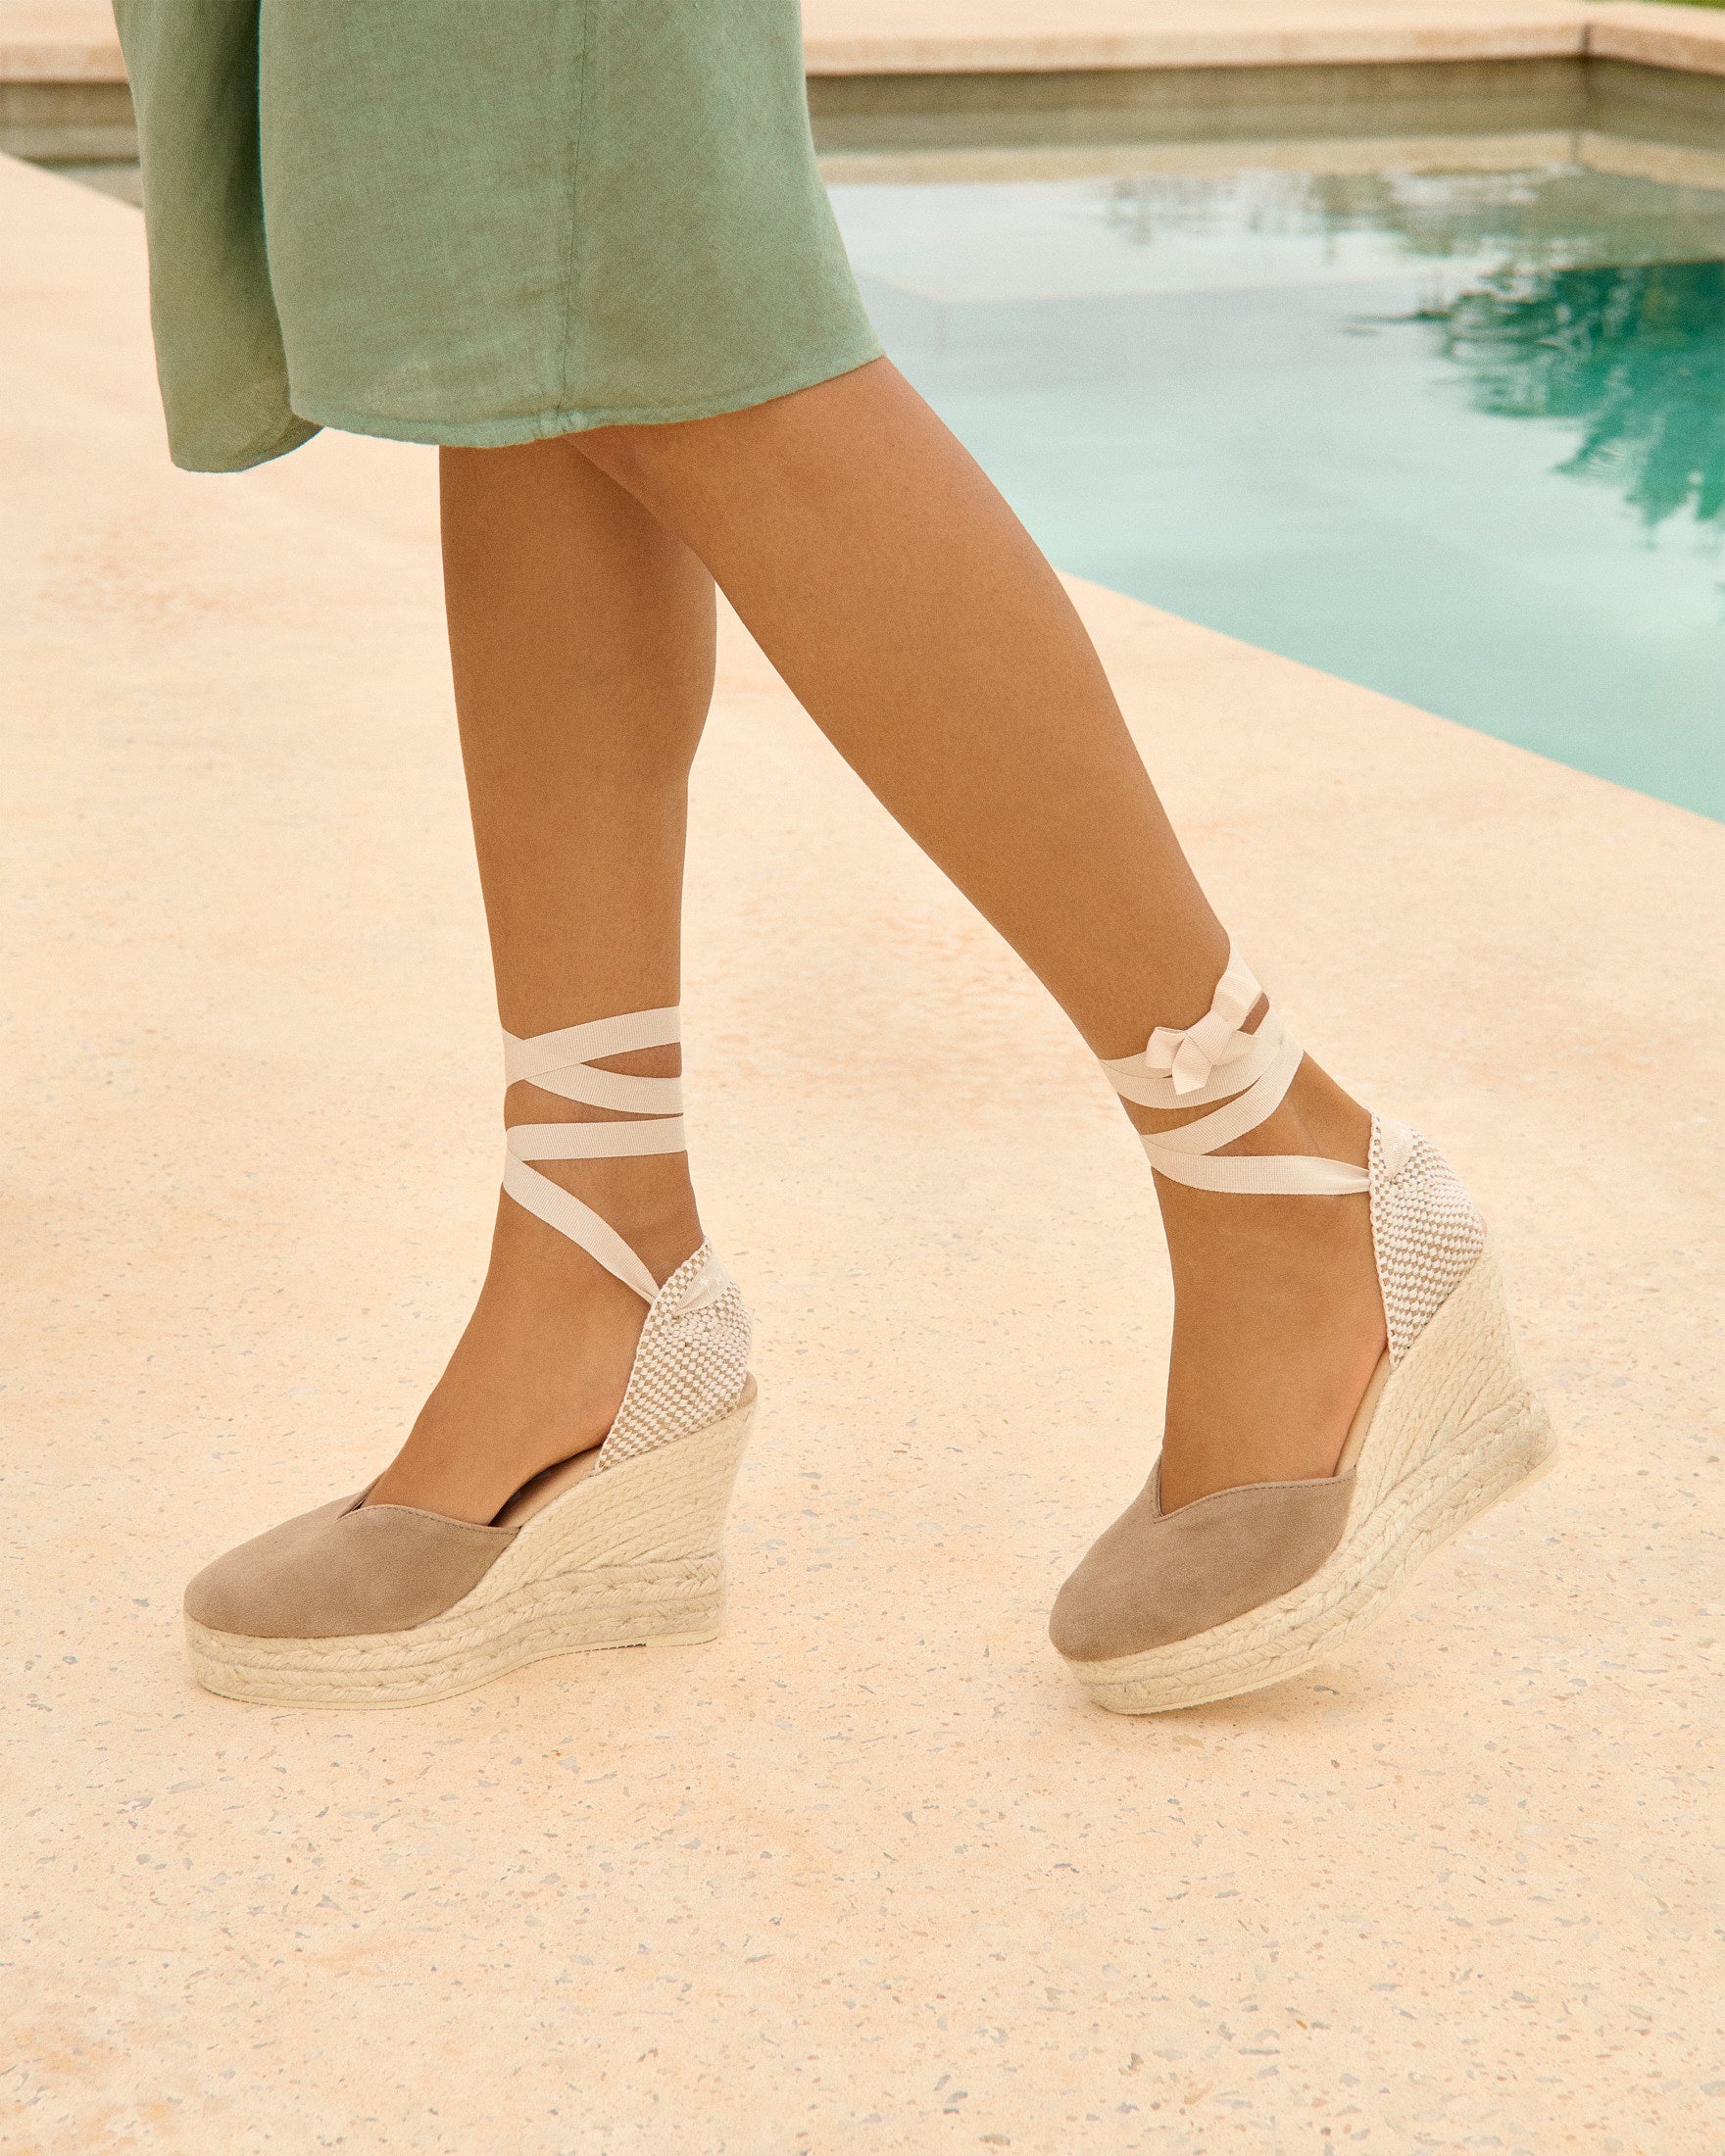 Soft Suede Heart-Shaped|Wedge Espadrilles - Hamptons Vintage Taupe